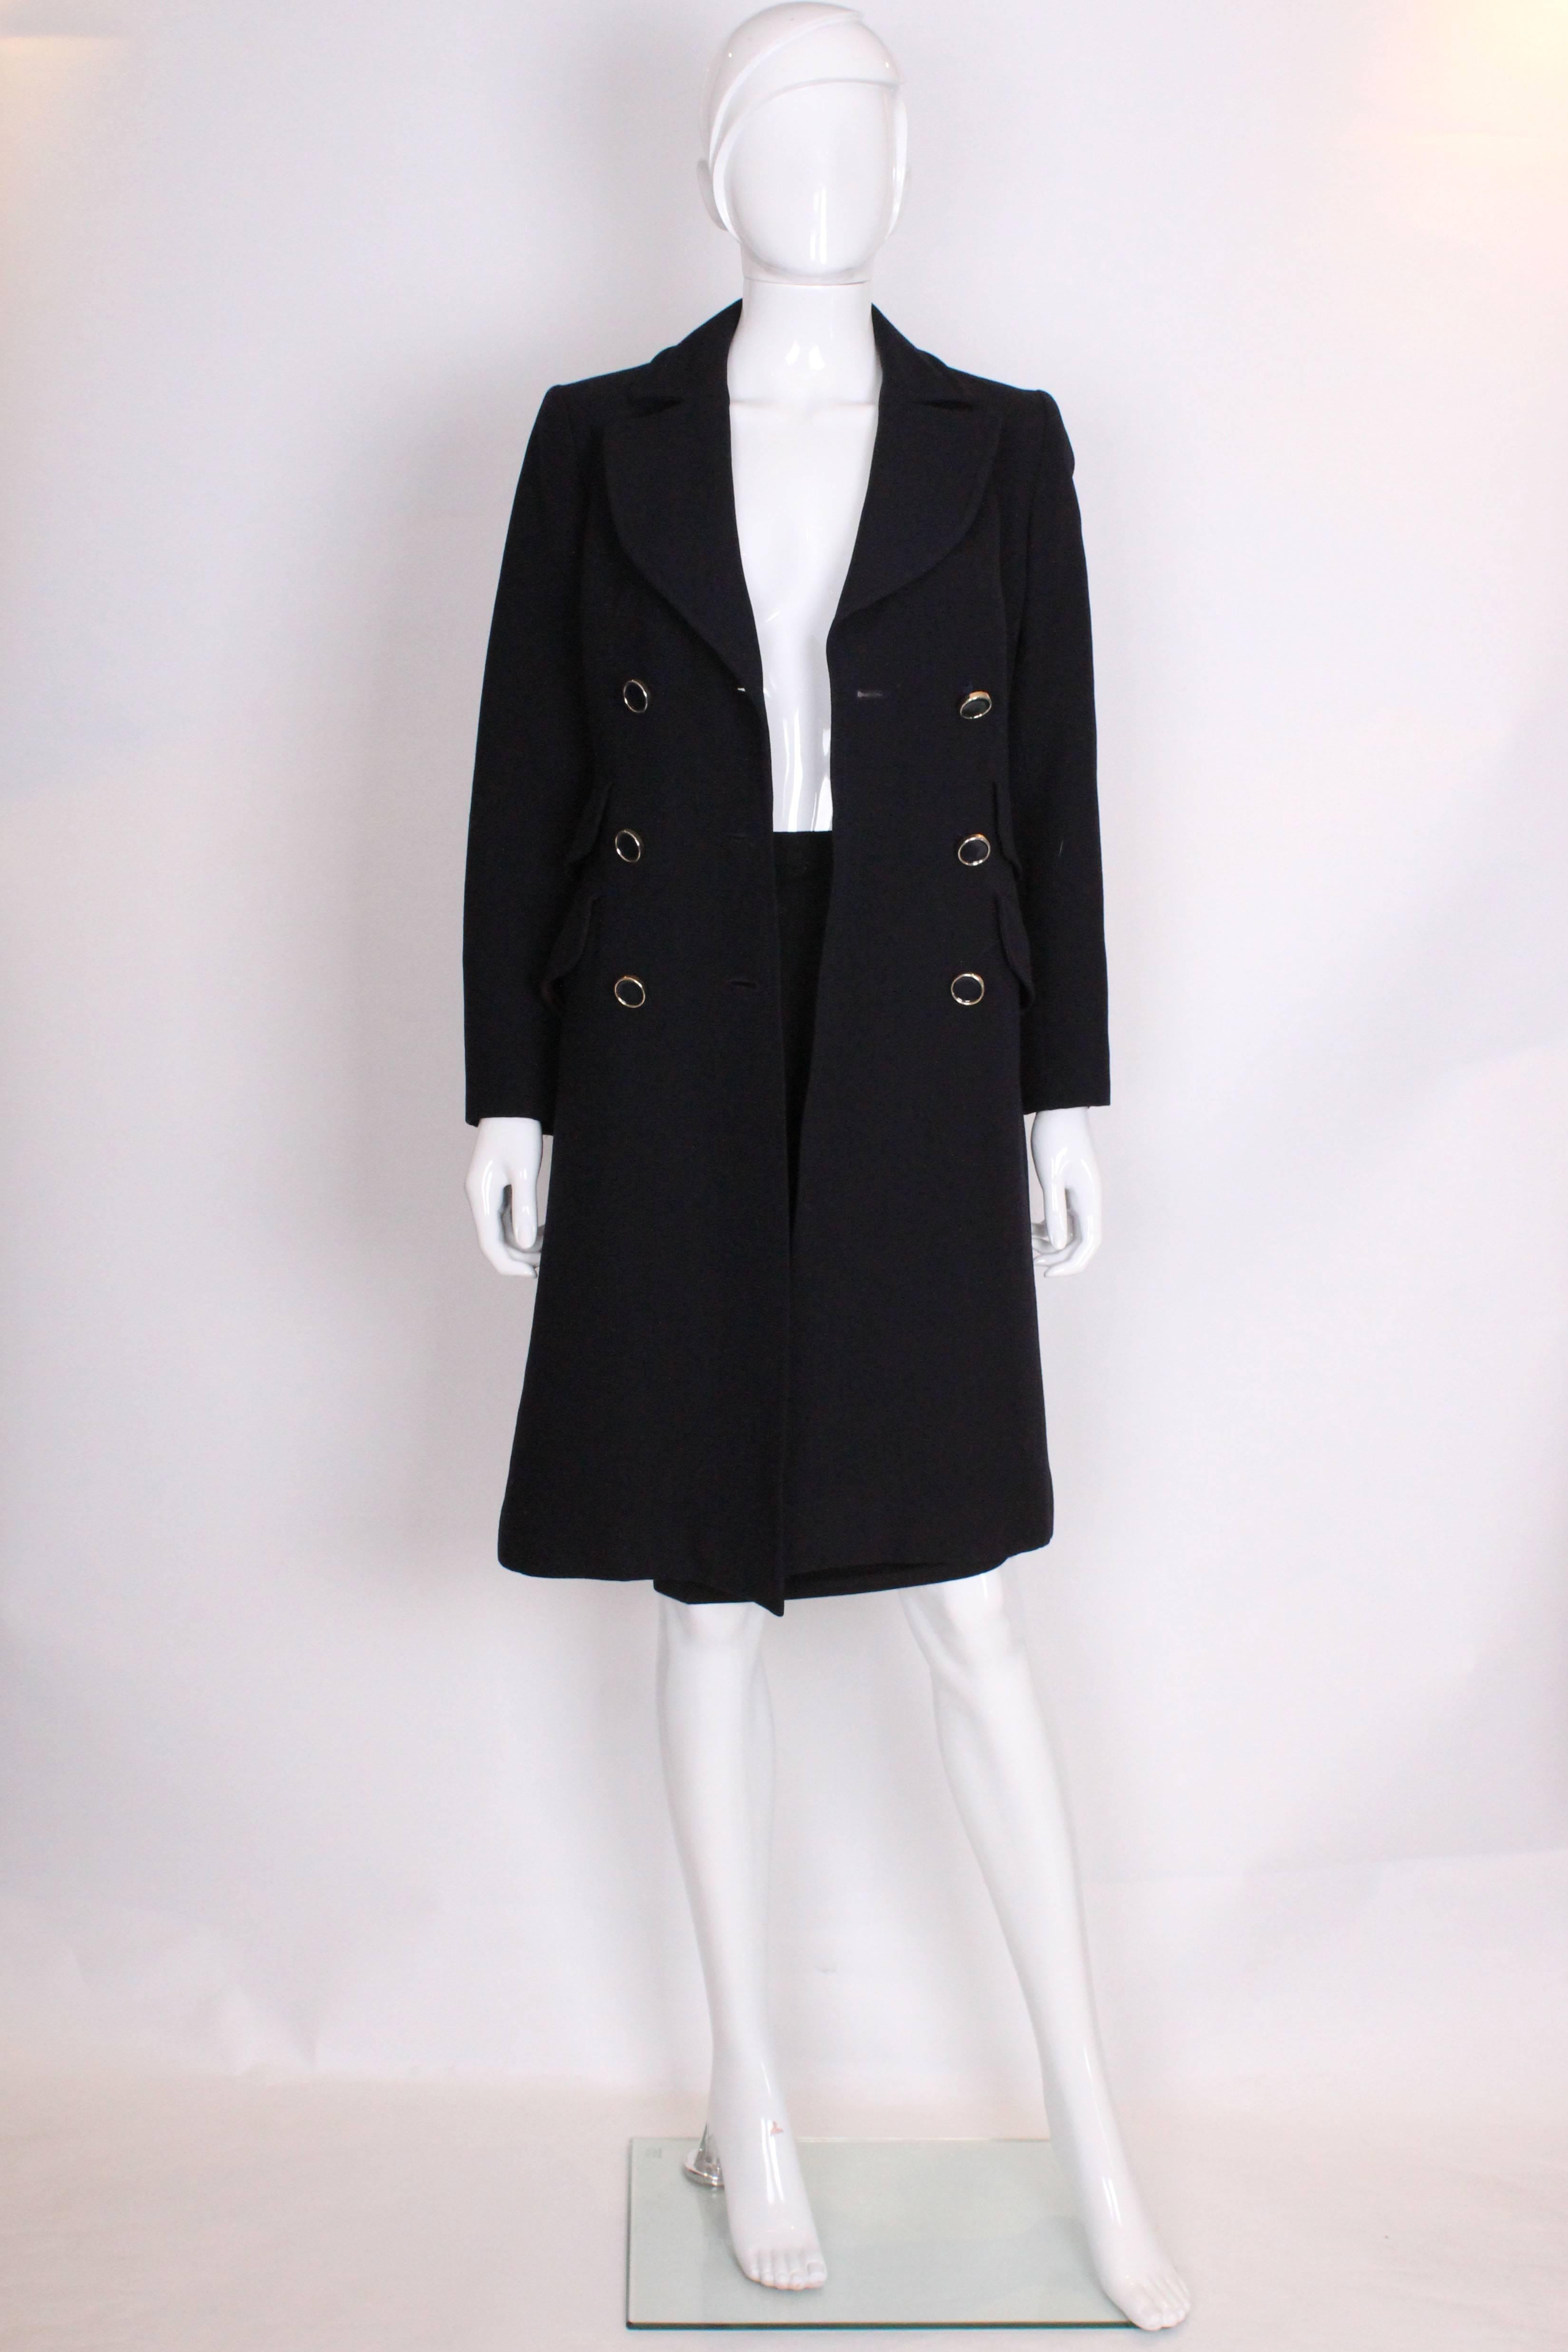 A chic coat for Fall by British brand Mansfield. In a stylish navy blue this coat is double breasted with three rows of buttons,  two real pockets and two fake pockets. It has a half belt at the back.It is a nice heavy wool and is fully lined.
